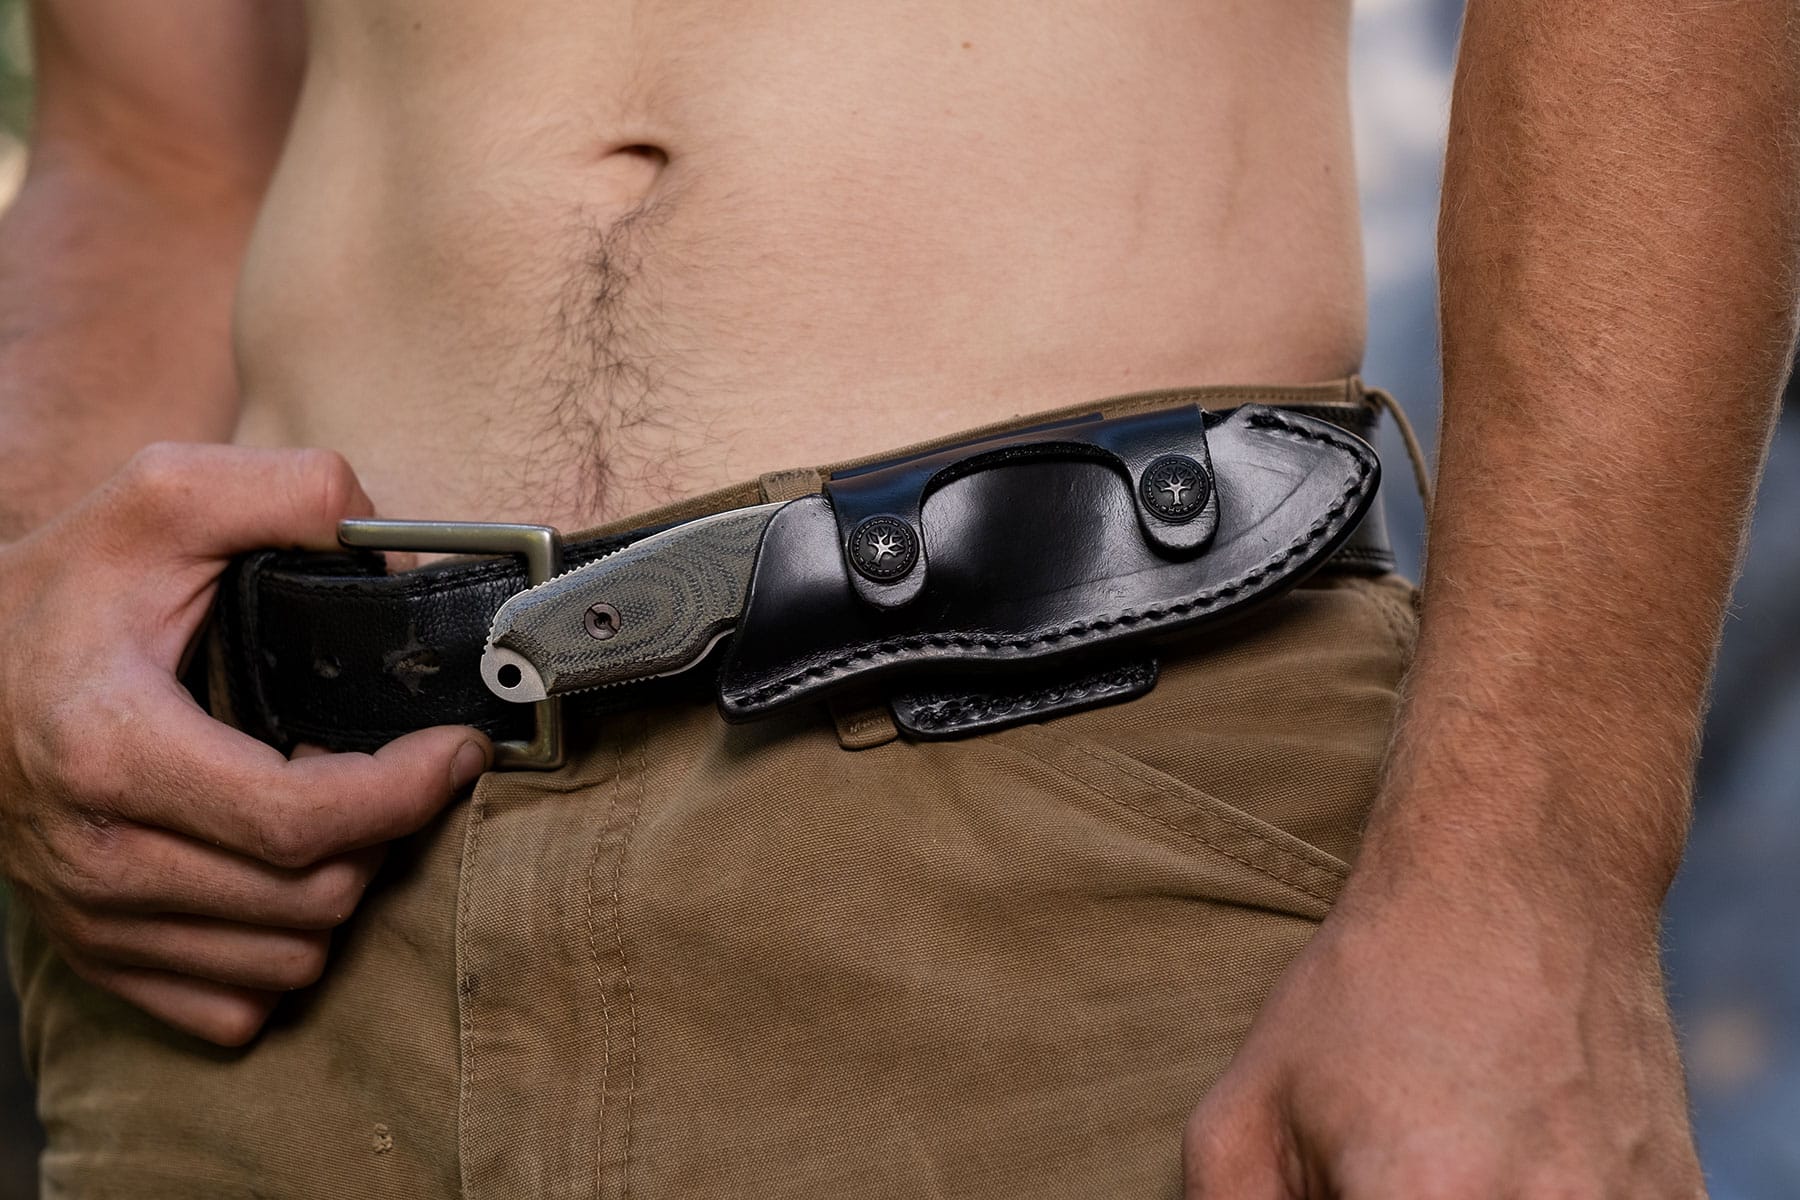 The Boker Arbolito El Heroe fixed blade knife in its leather sheath on a person's hip in the front horizontal carry position.